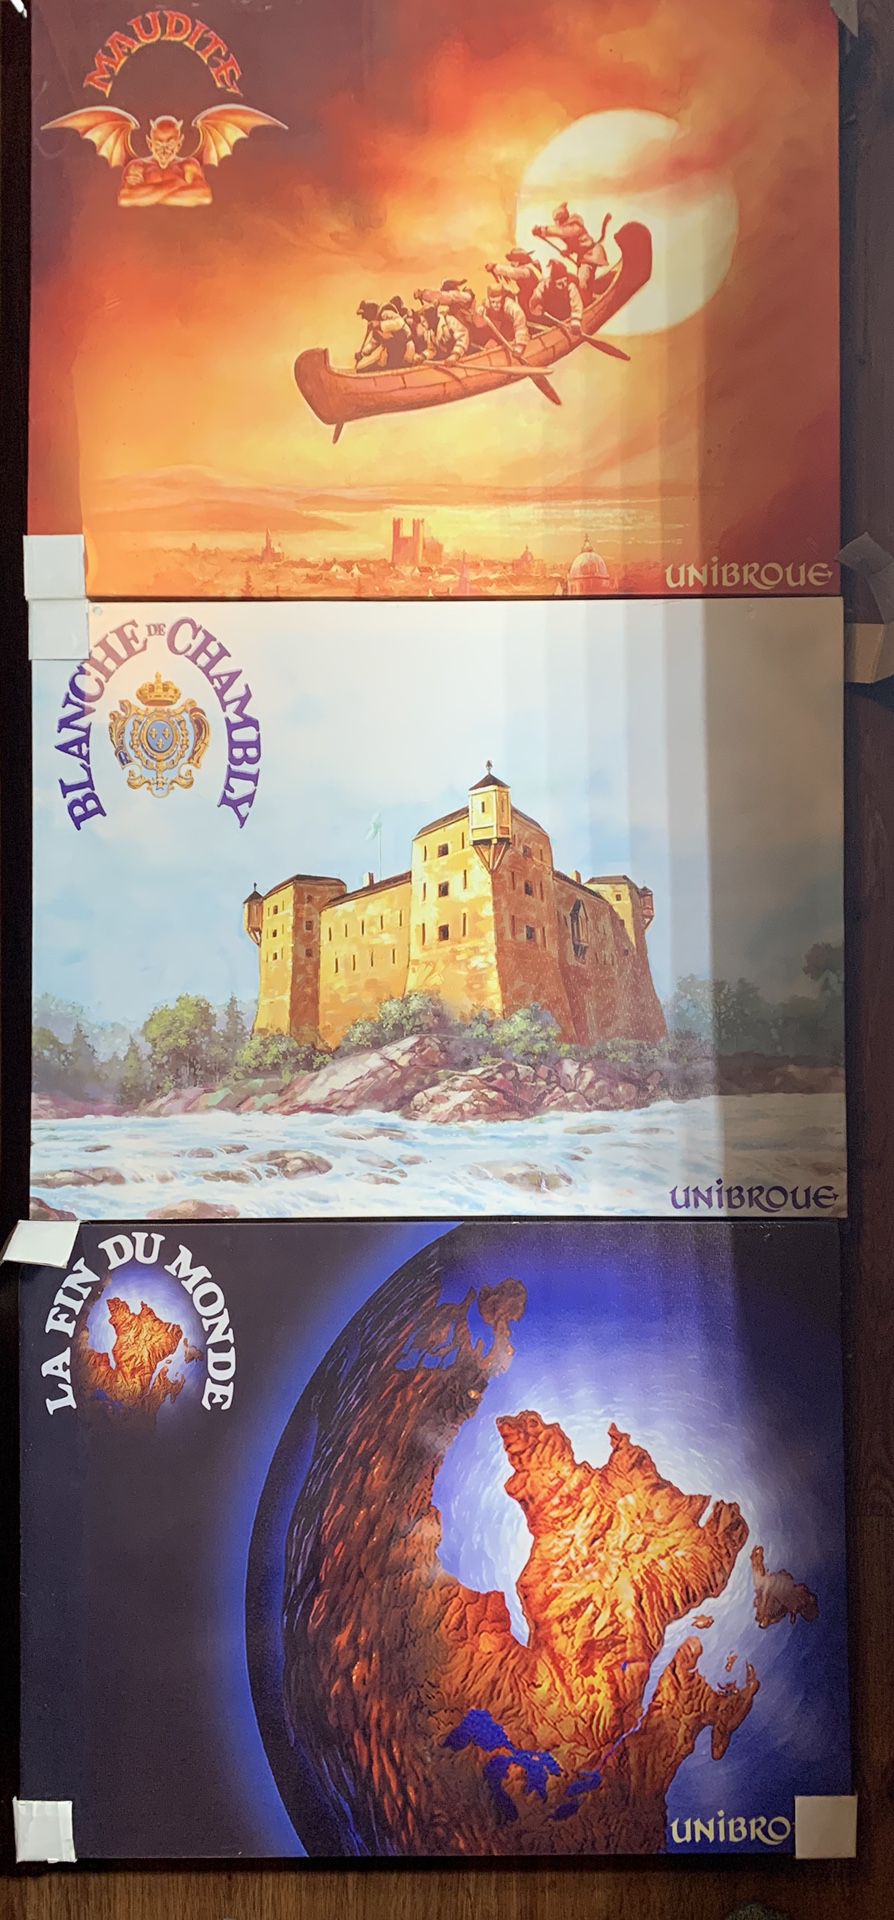 3 Unibroe beer picture poster frames $35